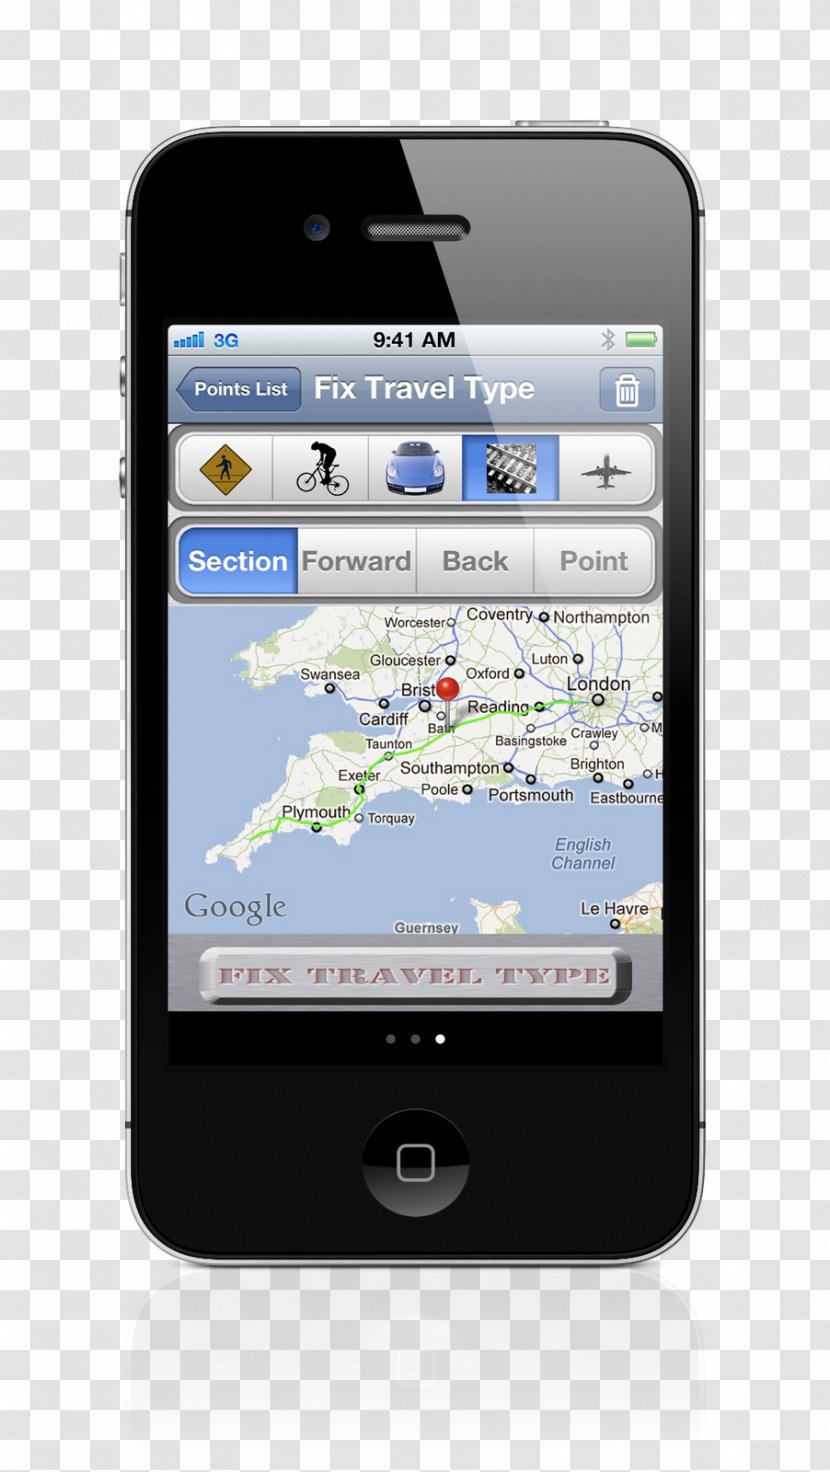 IPhone 4S IPod Touch App Store - Gadget - Email Transparent PNG